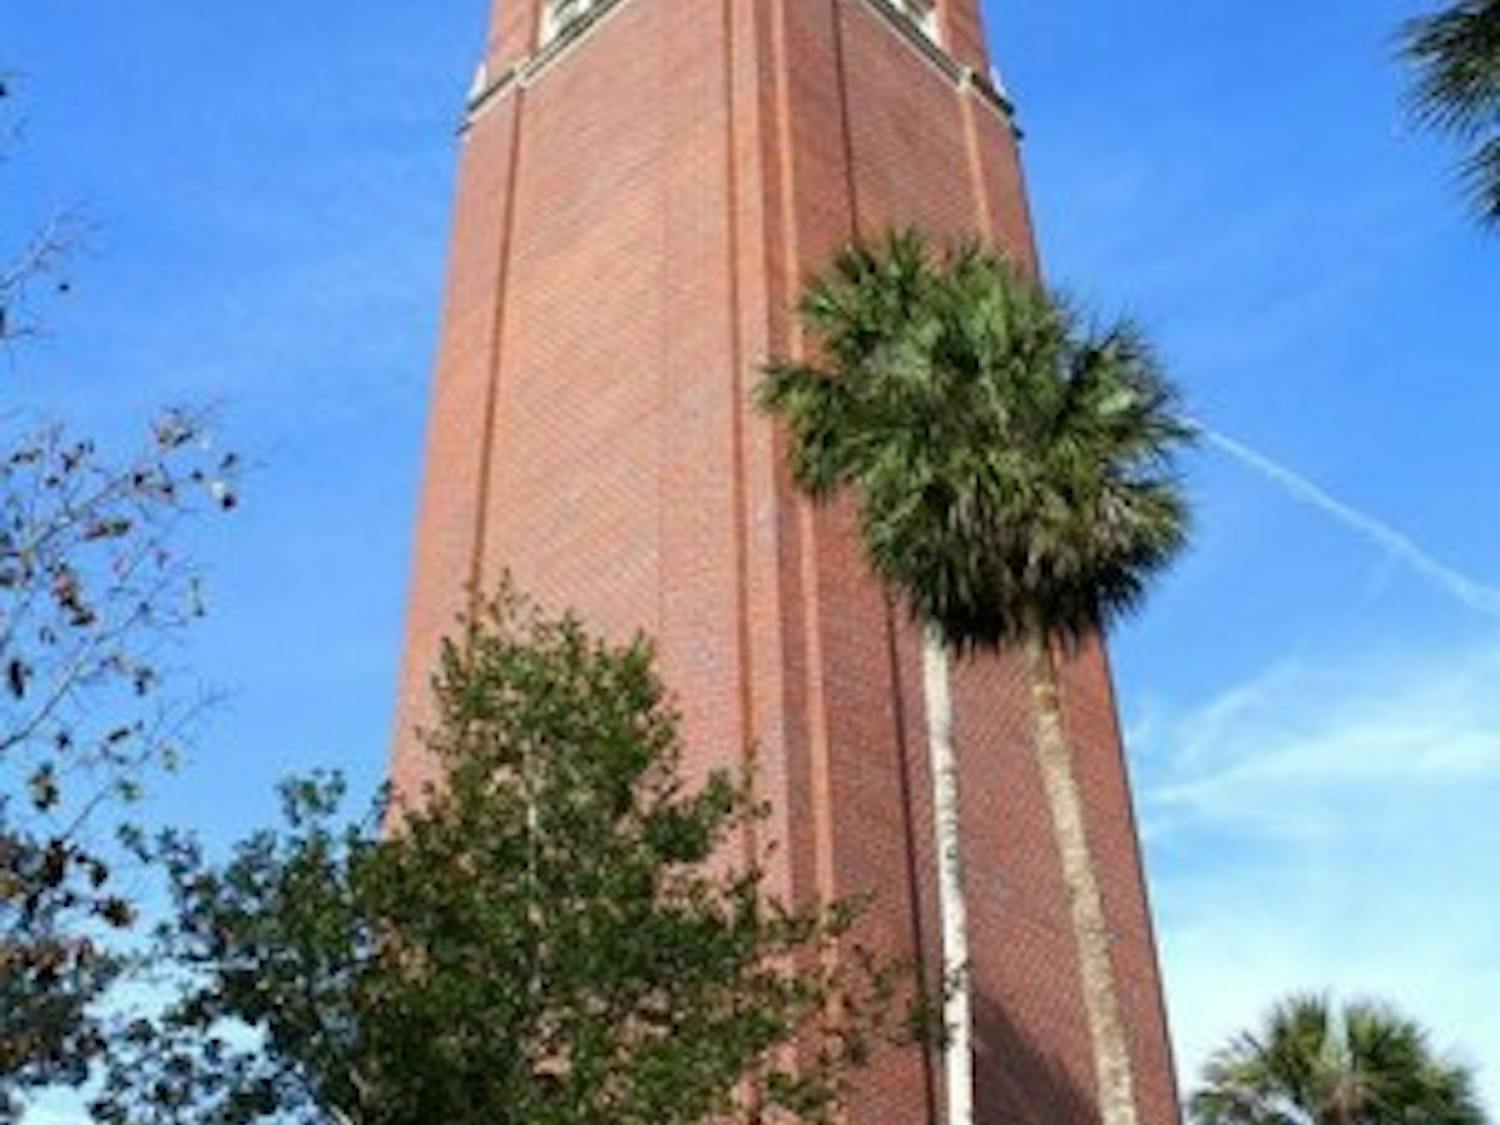 UF tied for eighth place&nbsp;in the U.S. News and World Report’s 2019 list of top public universities. That is one place higher than last year's ranking.